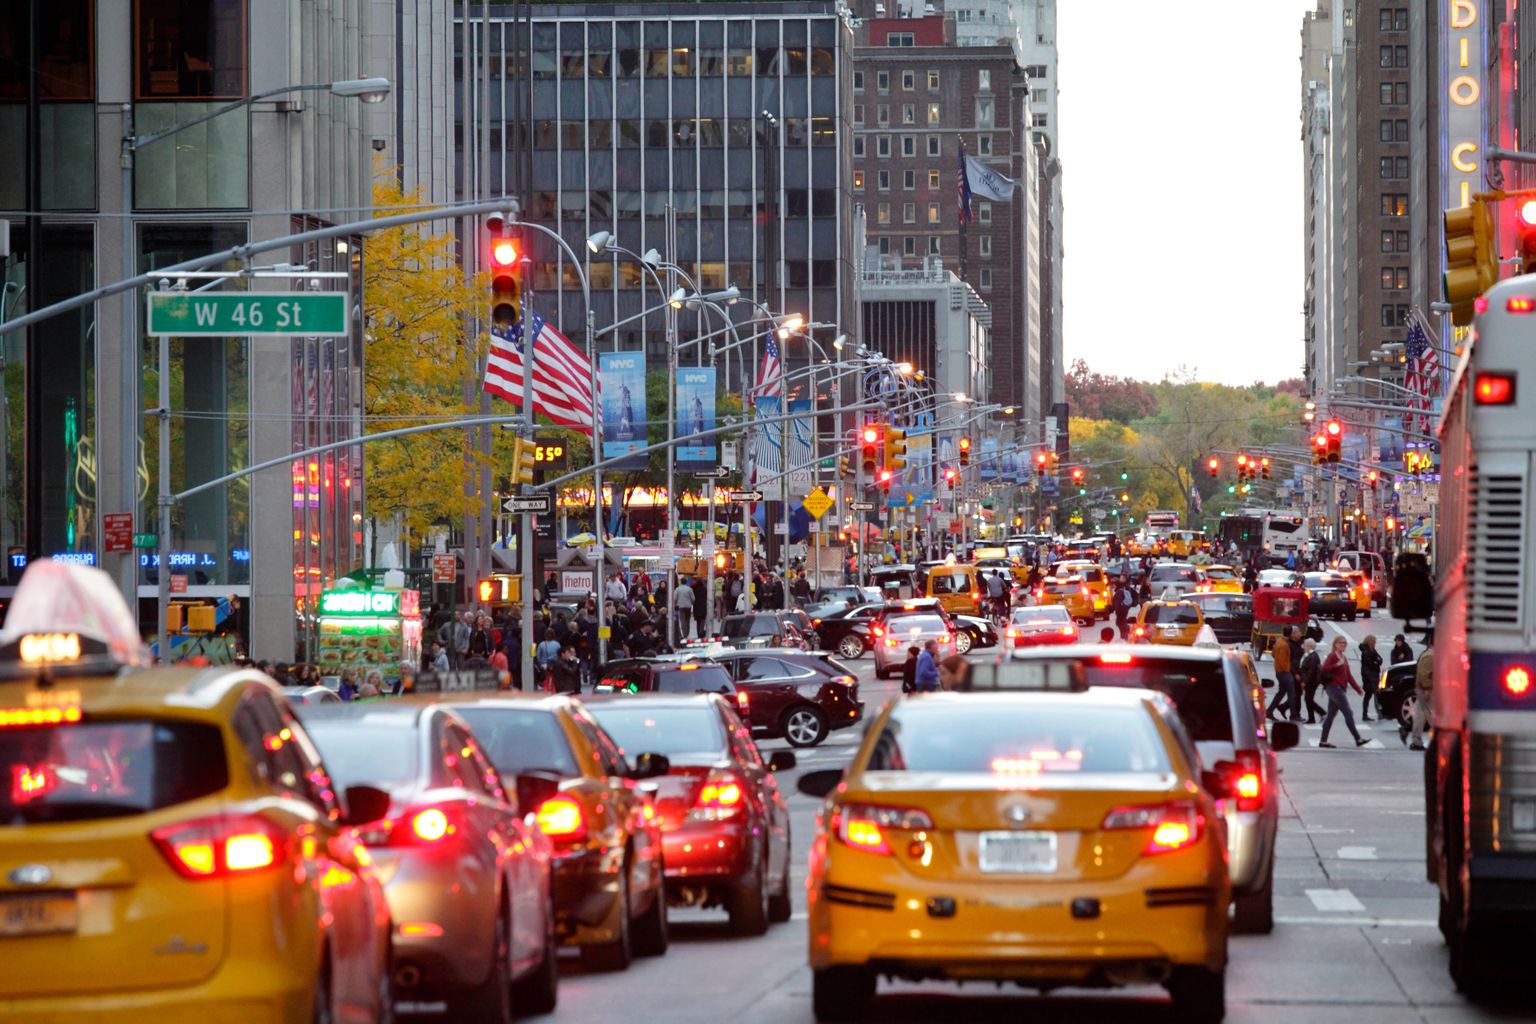 25.10.2015, New York City, New York, USA - Strong traffic on 5th Avenue in Manhattan. 00P151025D205CAROE.JPG - NOT for SALE in G E R M A N Y, A U S T R I A, S W I T Z E R L A N D [MODEL RELEASE: NO, PROPERTY RELEASE: NO, (c) caro photo agency / Muhs, http://www.caro-images.com, info@carofoto.pl - Any use of this picture is subject to royalty!]